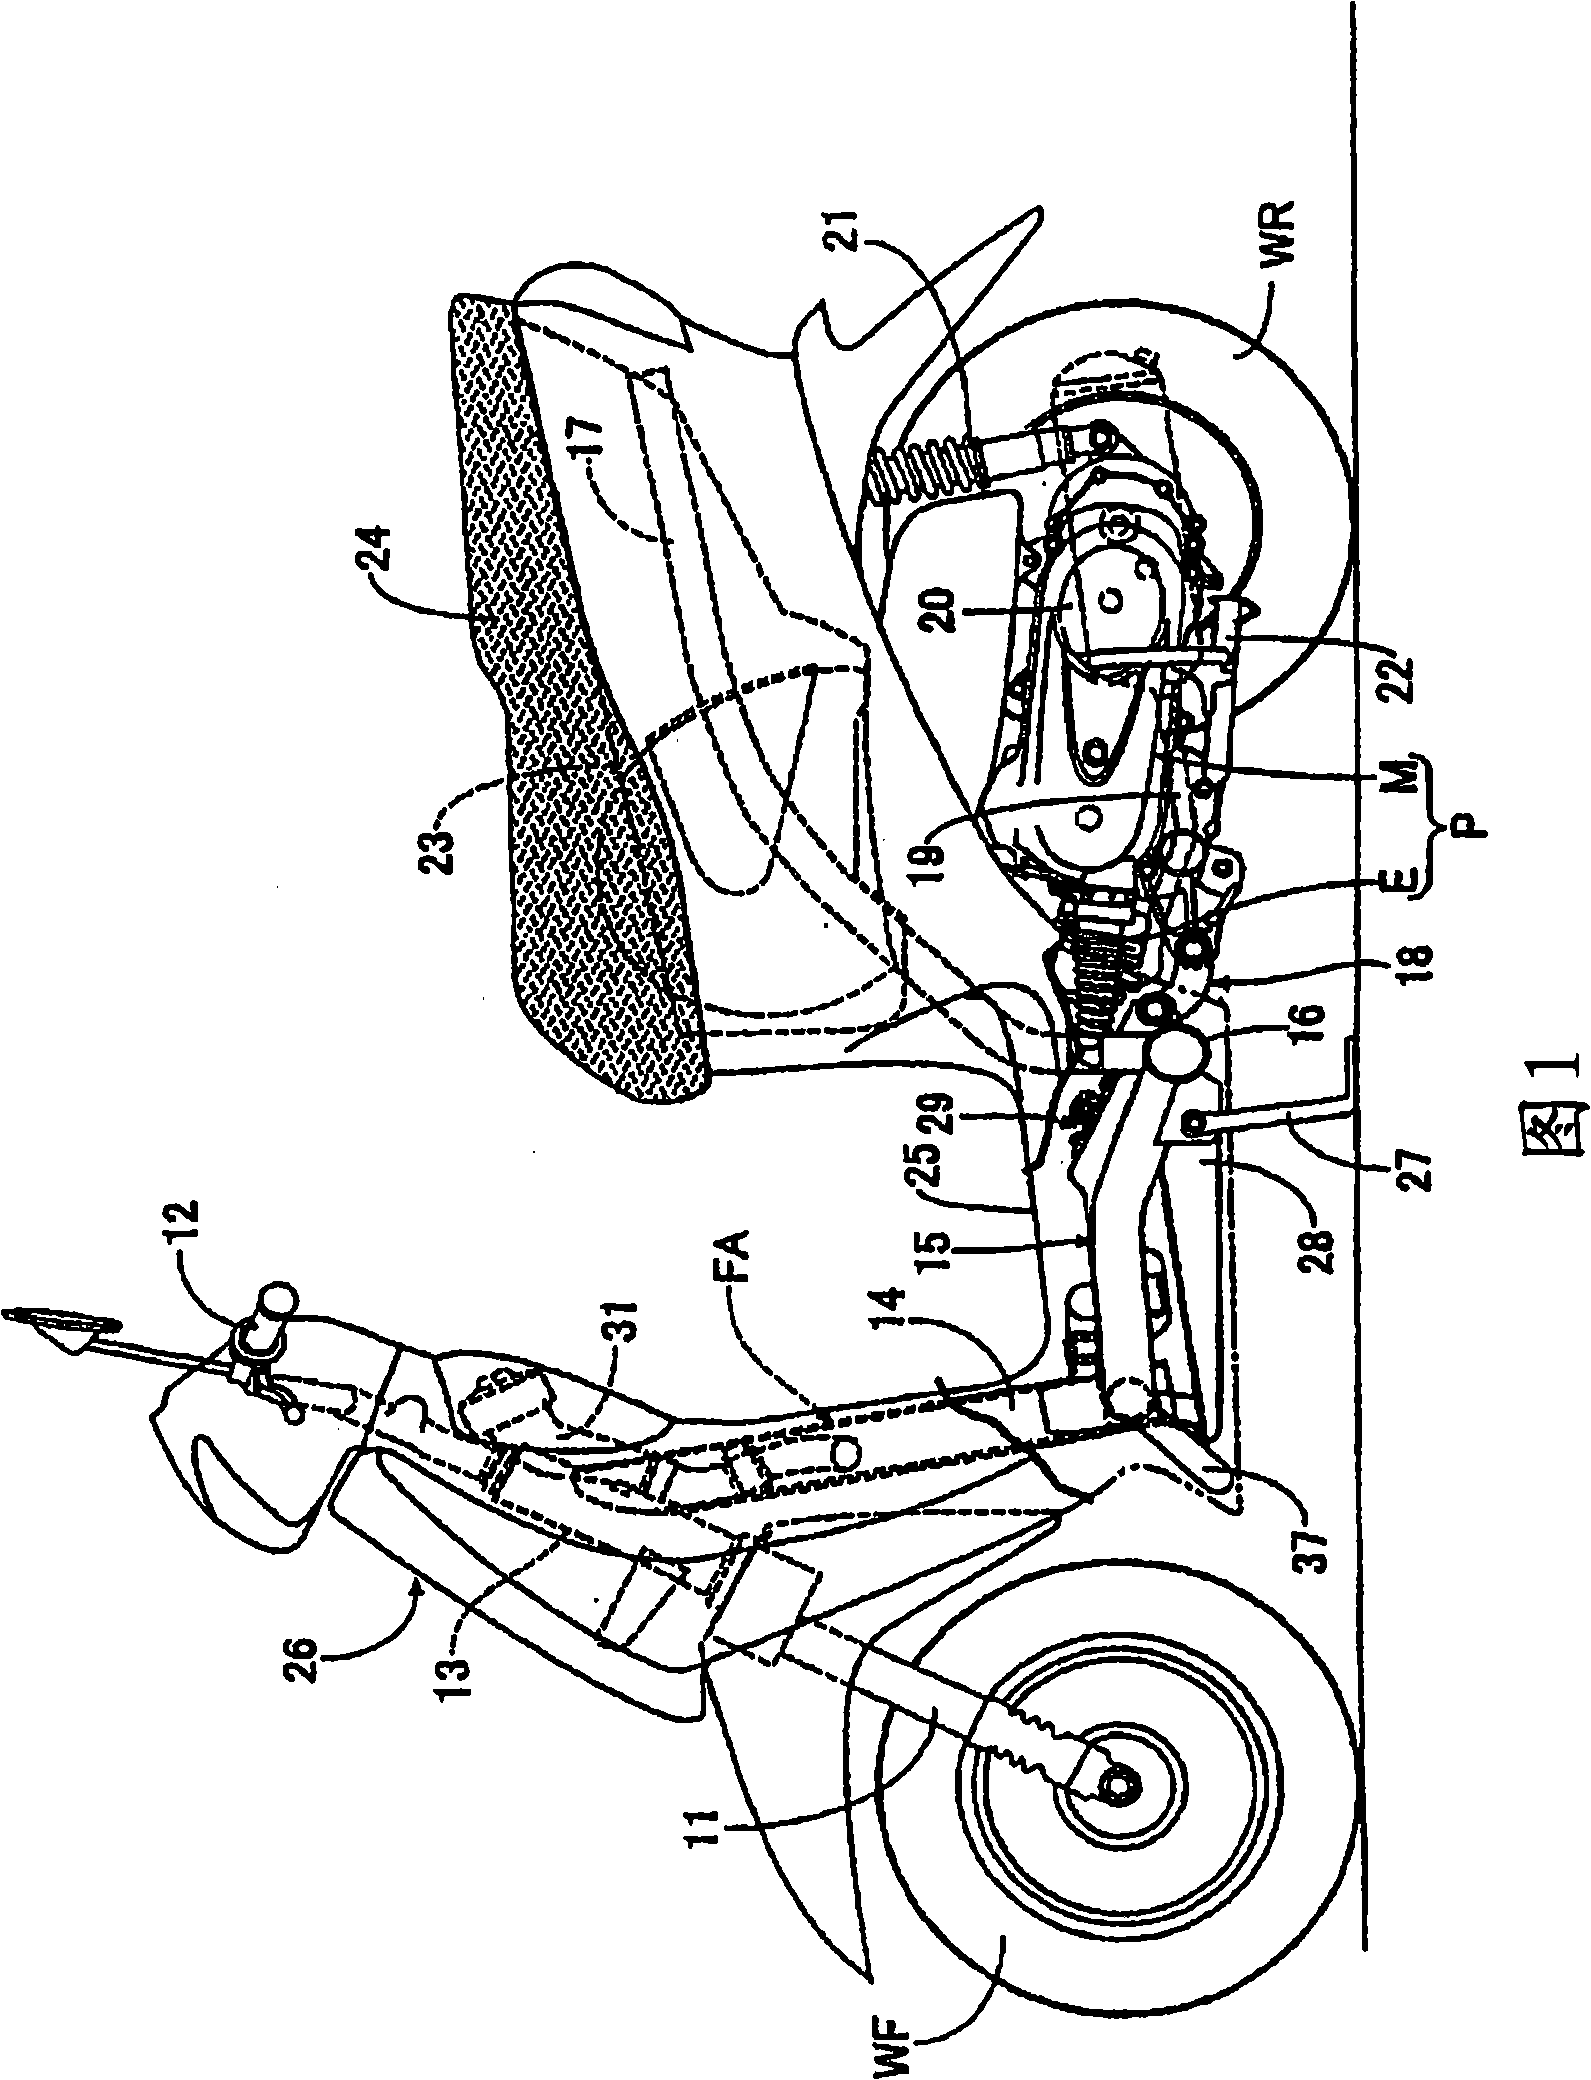 Fuel supply structure for small-type vehicle